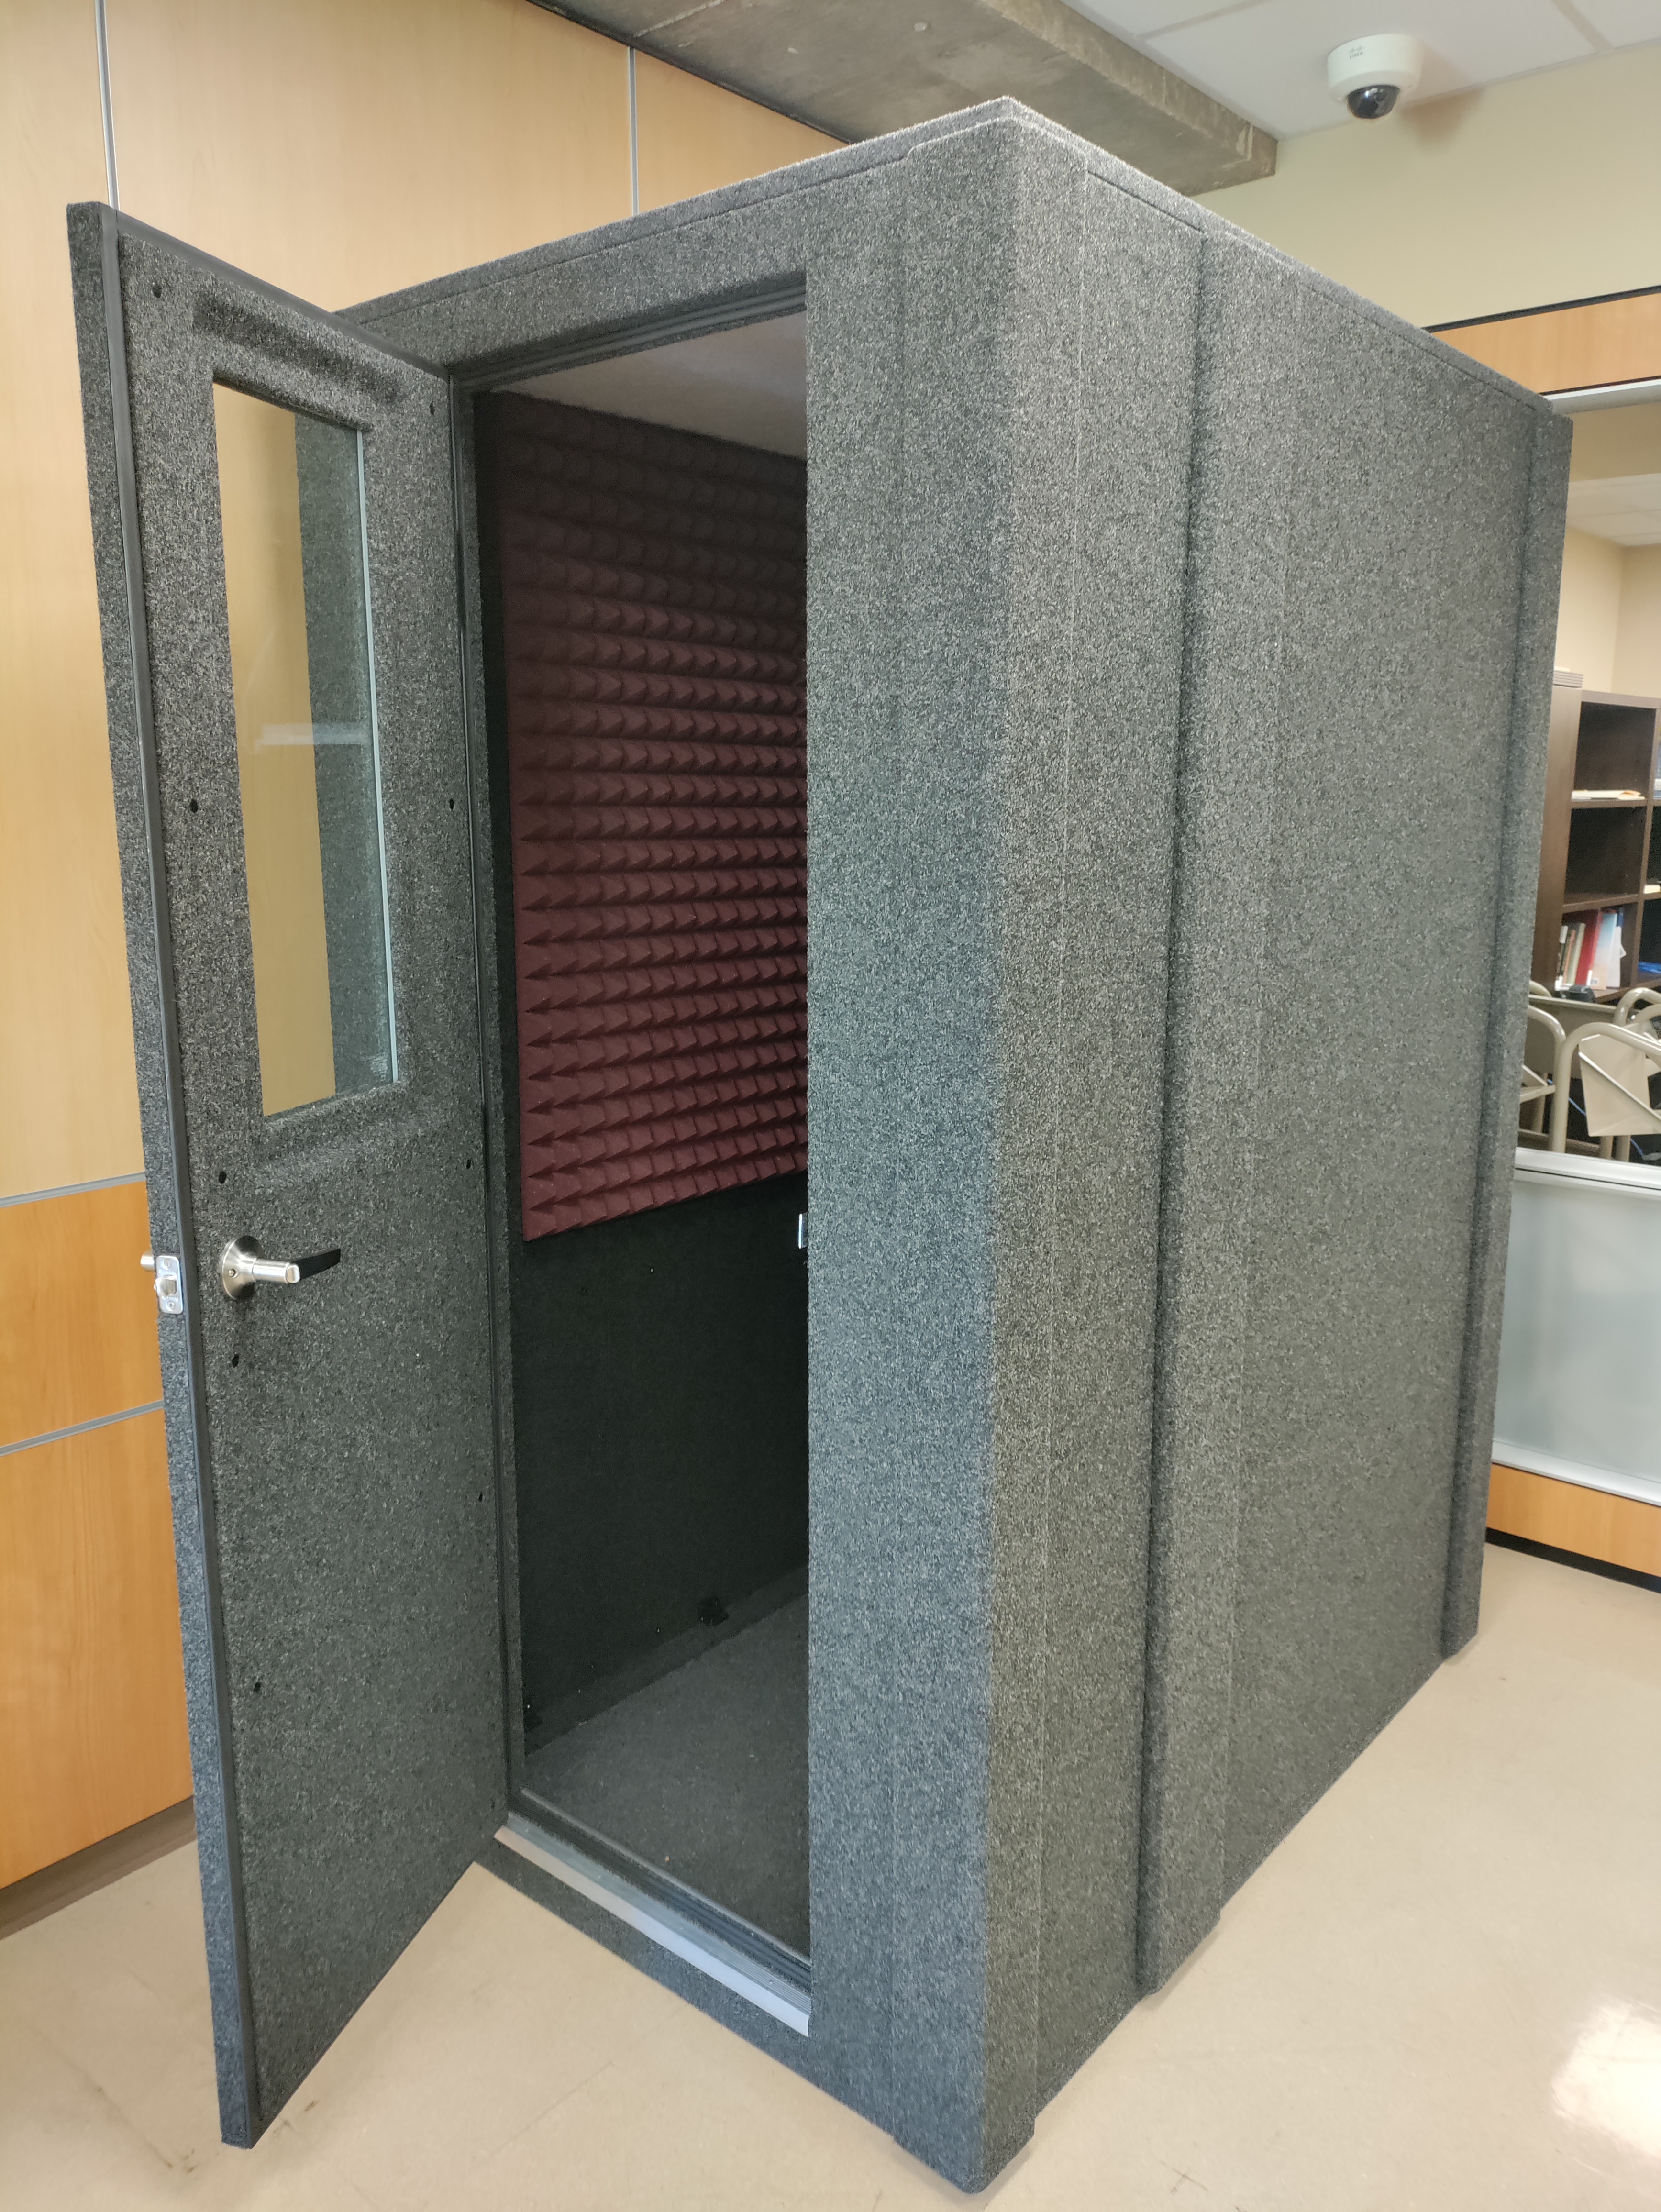 Photo of a freestanding recording booth with the door open. Maroon sound-insulating foam is visible on the inside walls.